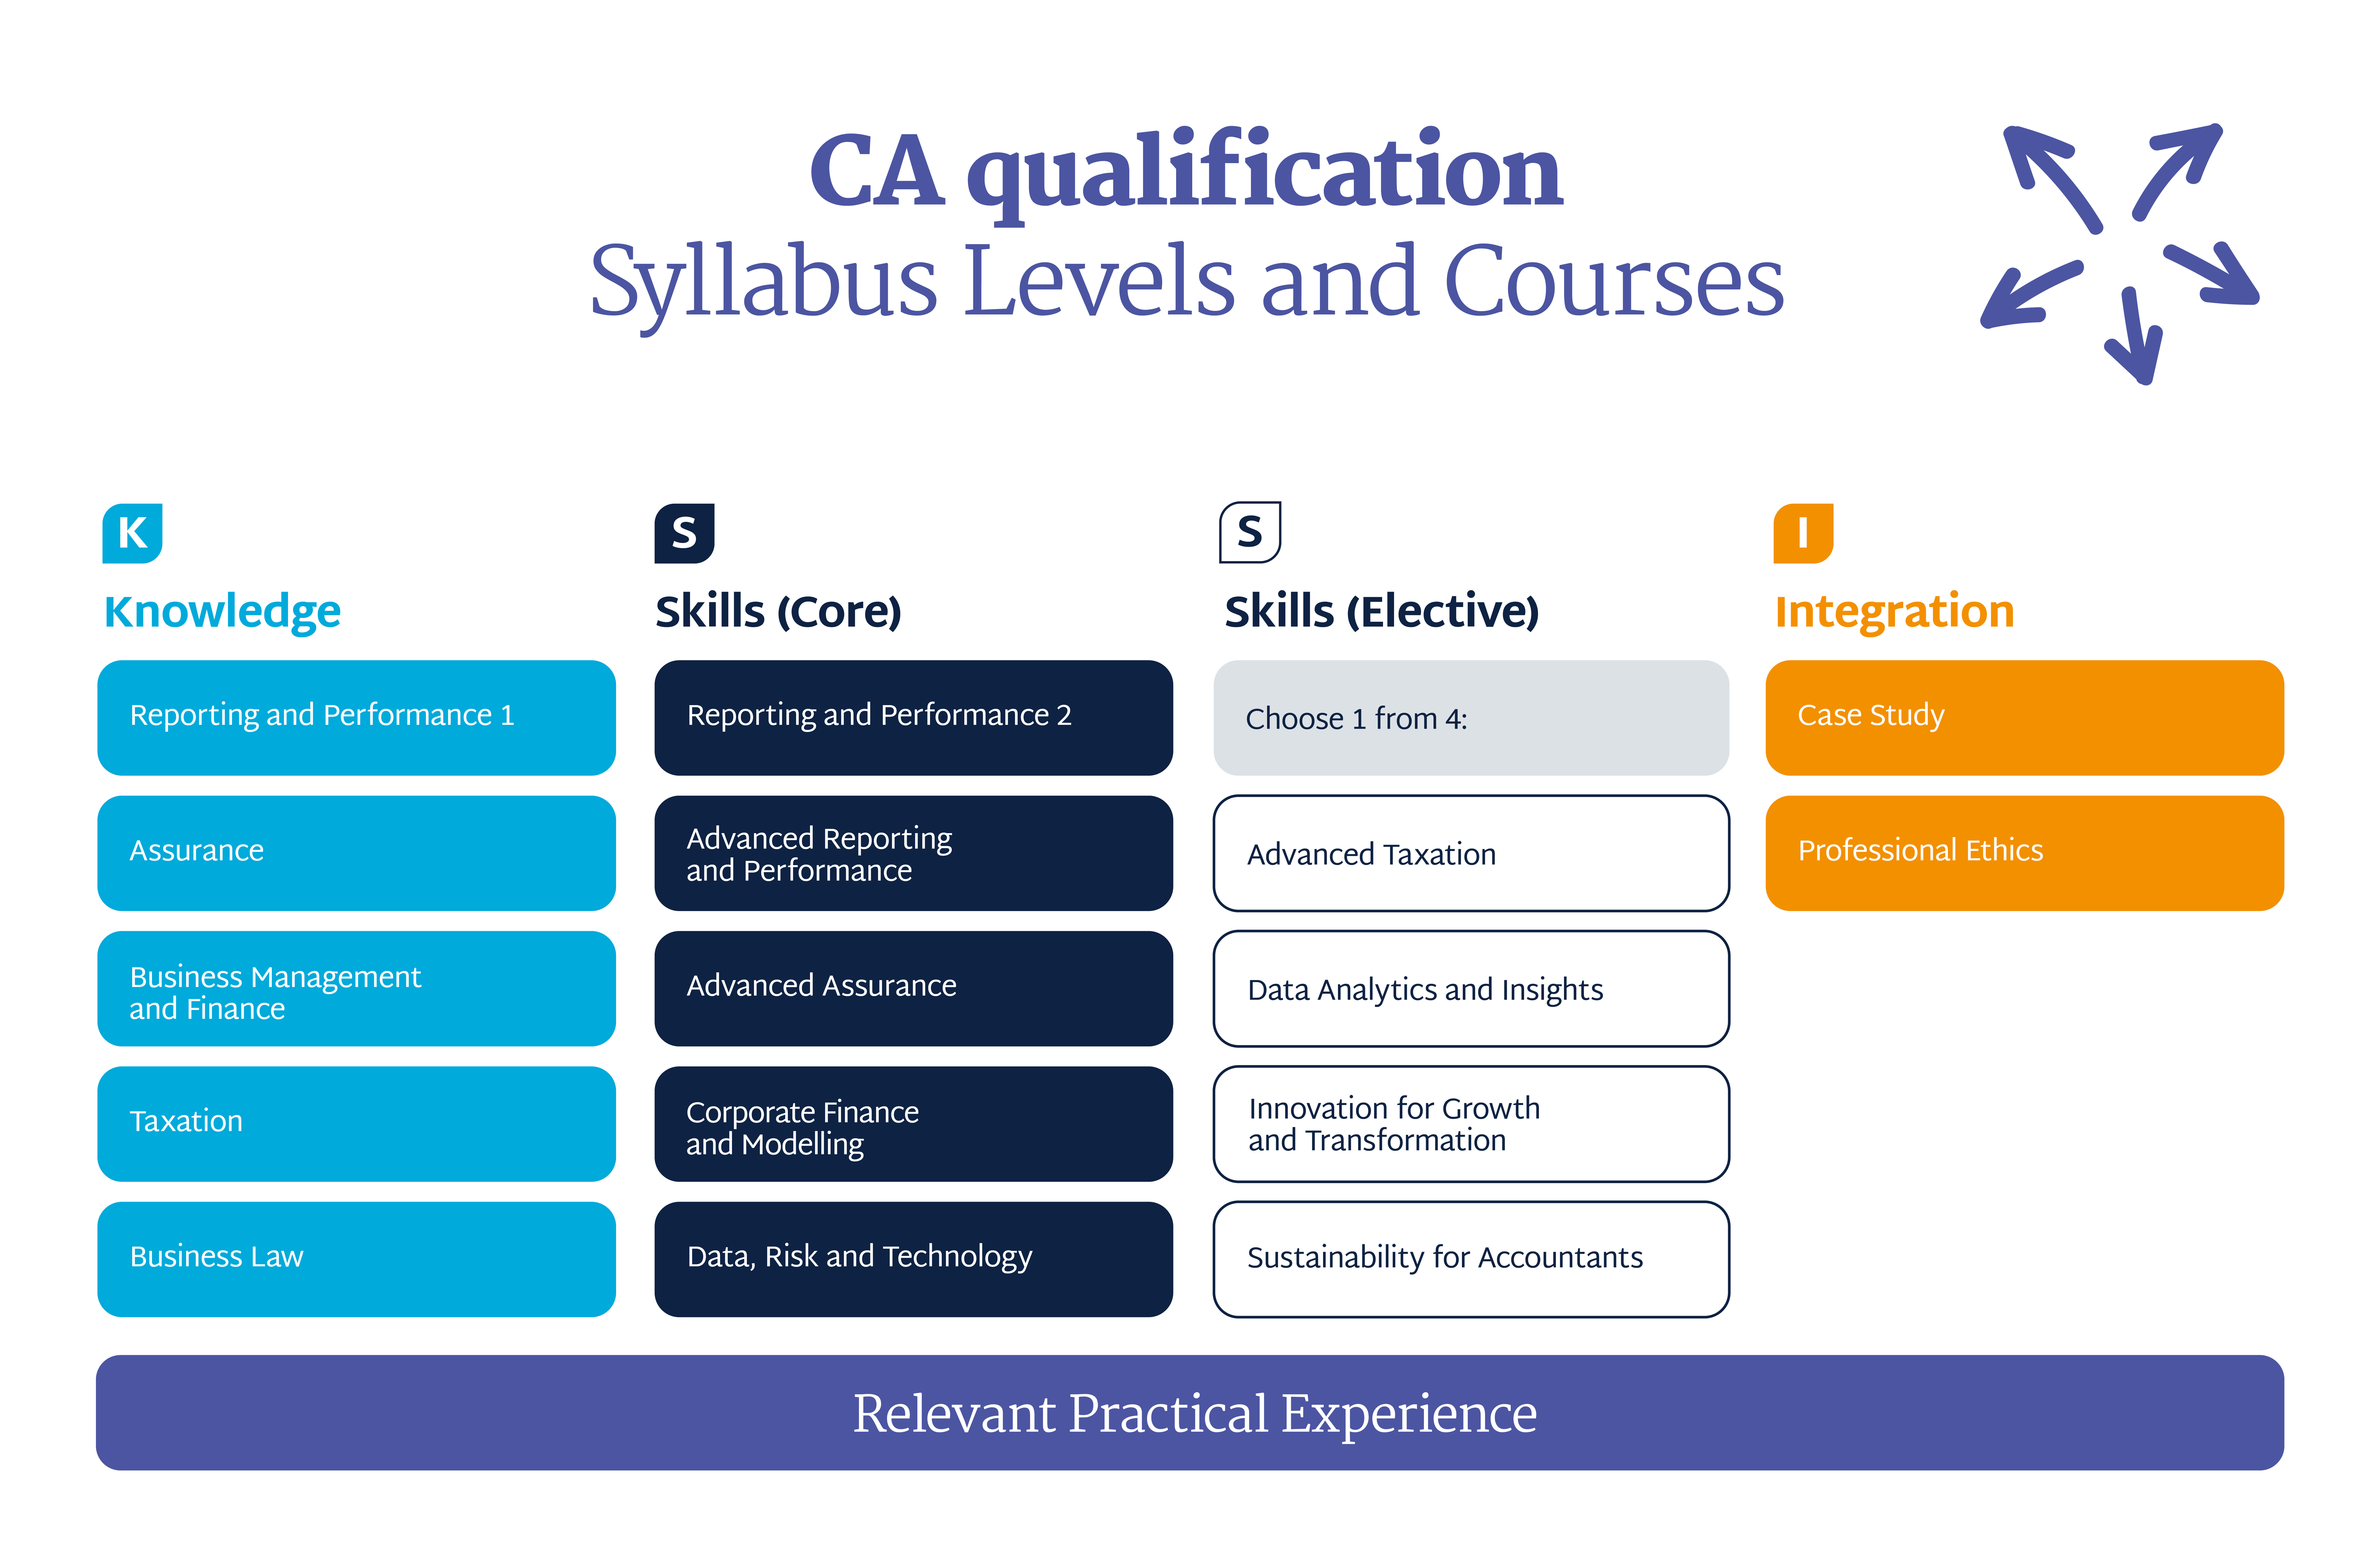 The new syllabus and its three levels and their courses.